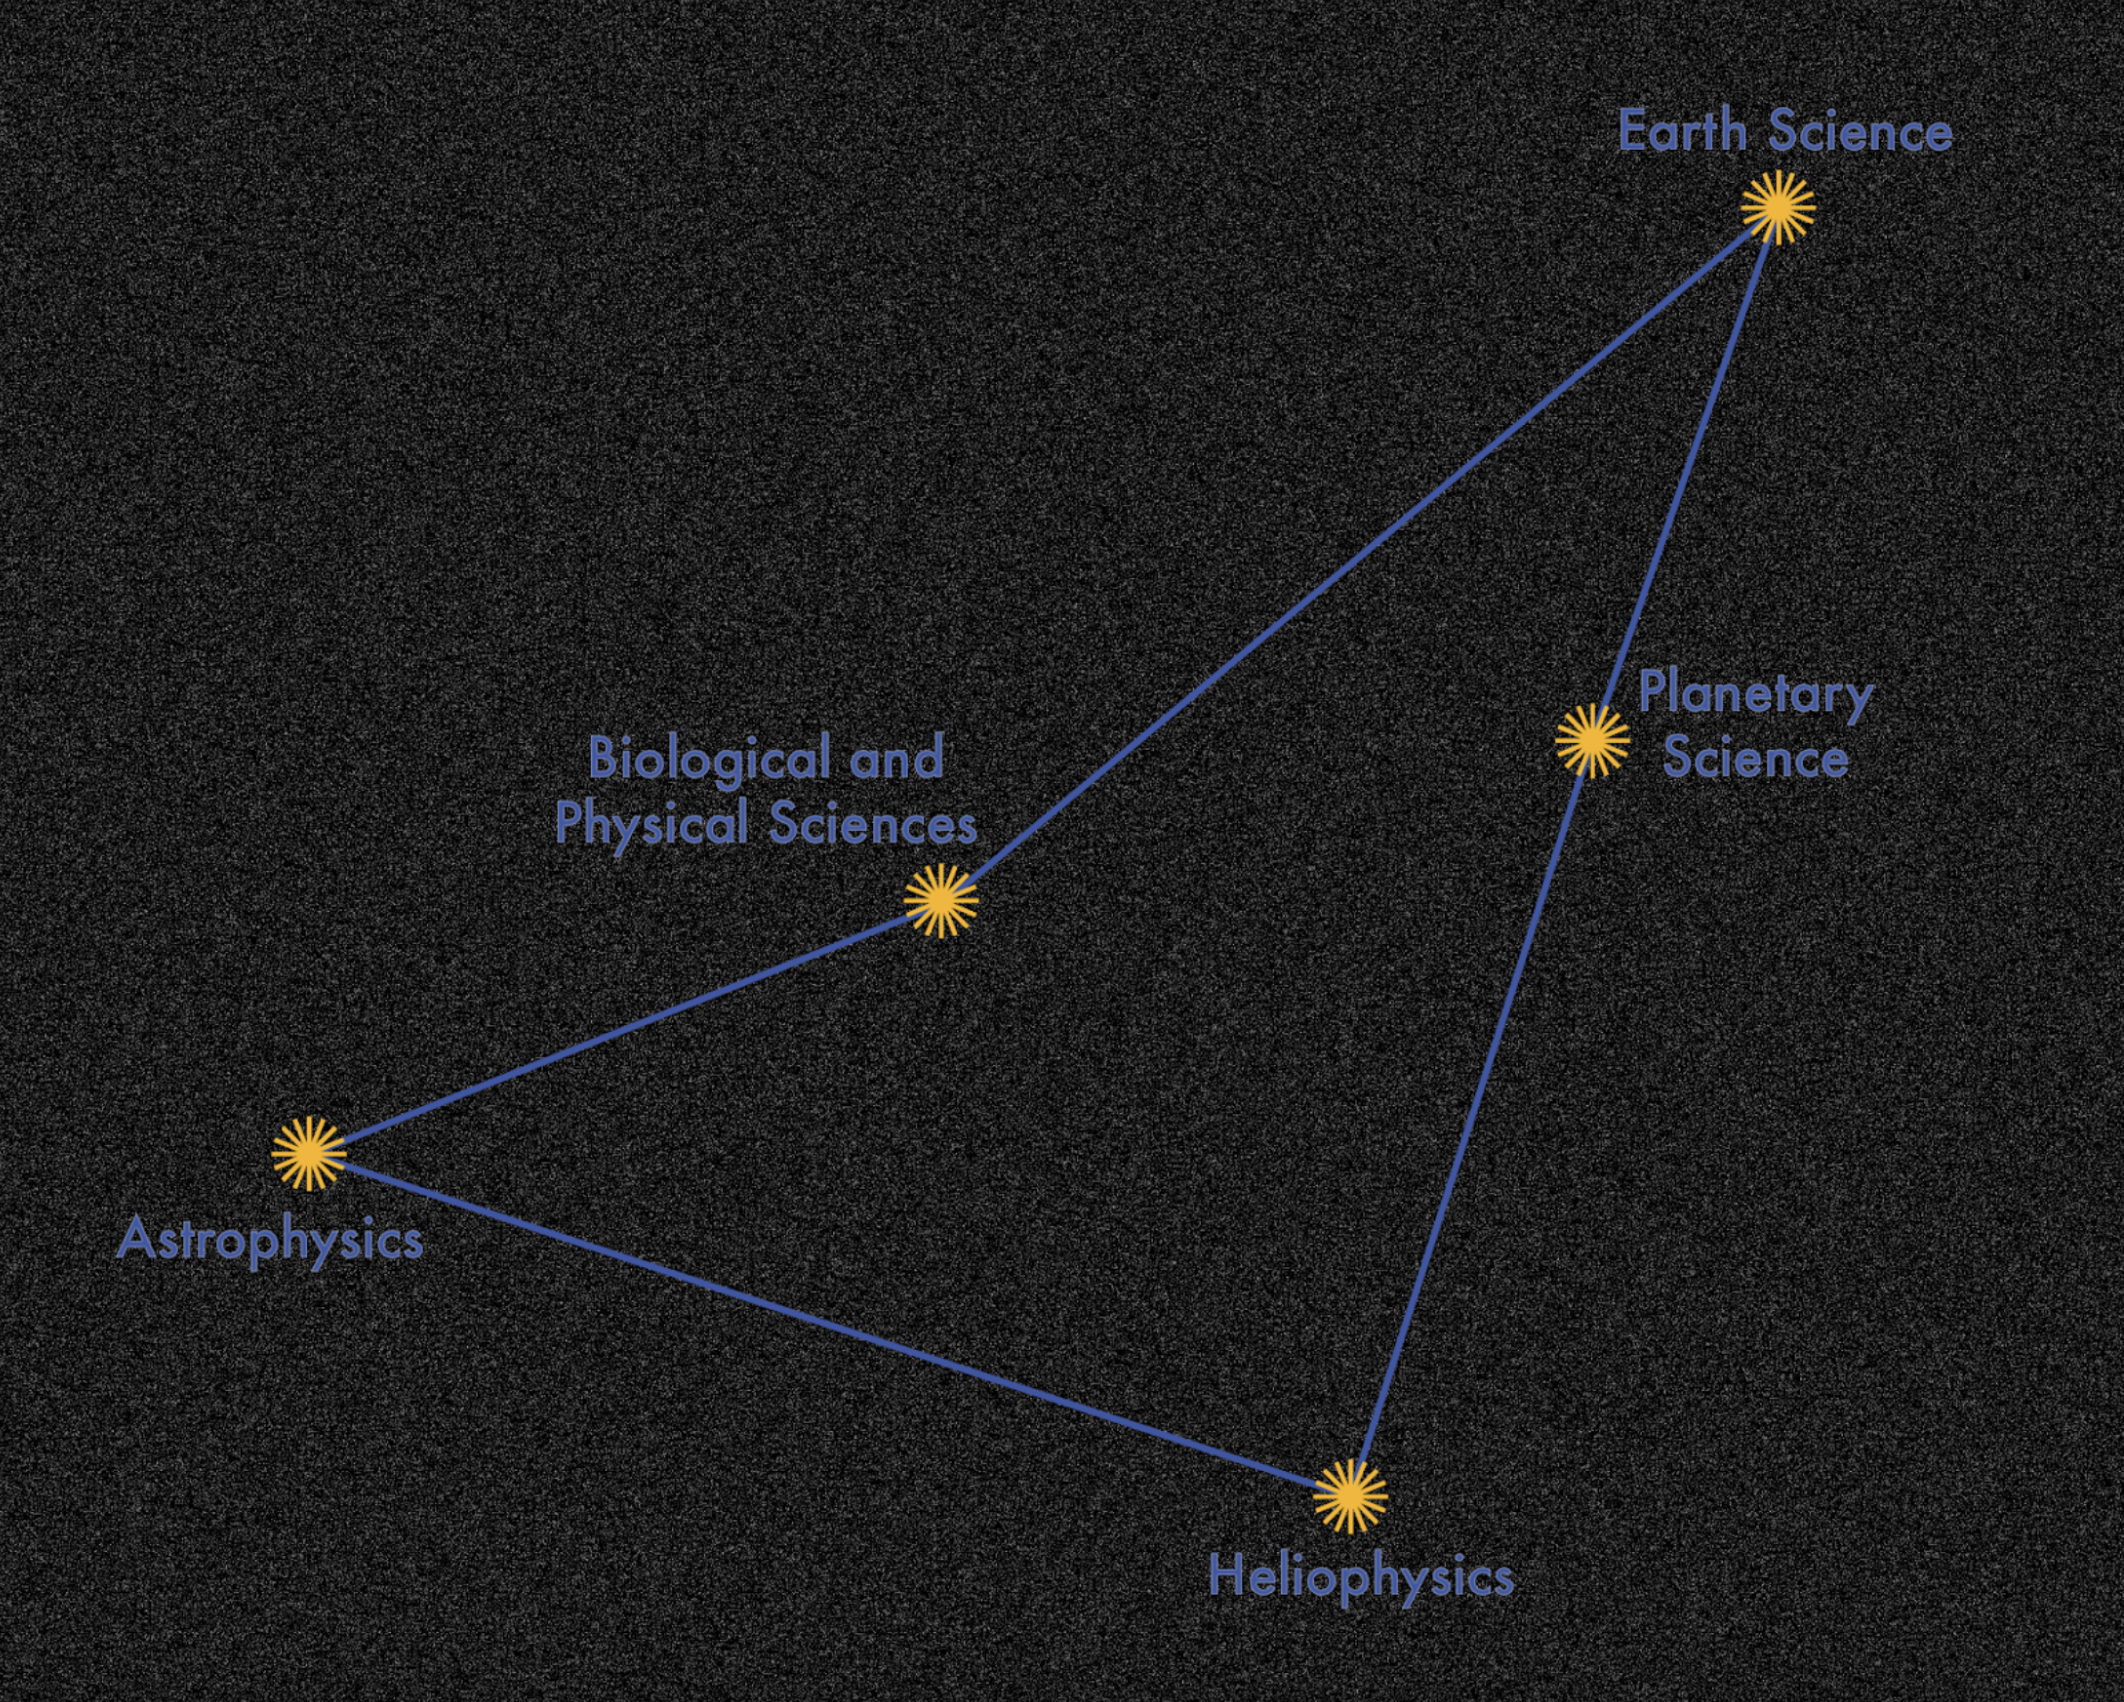 Five orange stars are connected with blue lines in a V-like shape, like a diagram of the constellation of Indus. Each of the stars is labeled with one of the NASA Science Mission Directorate divisions: astrophysics, biological and physical sciences, Earth science, heliophysics, and planetary science.